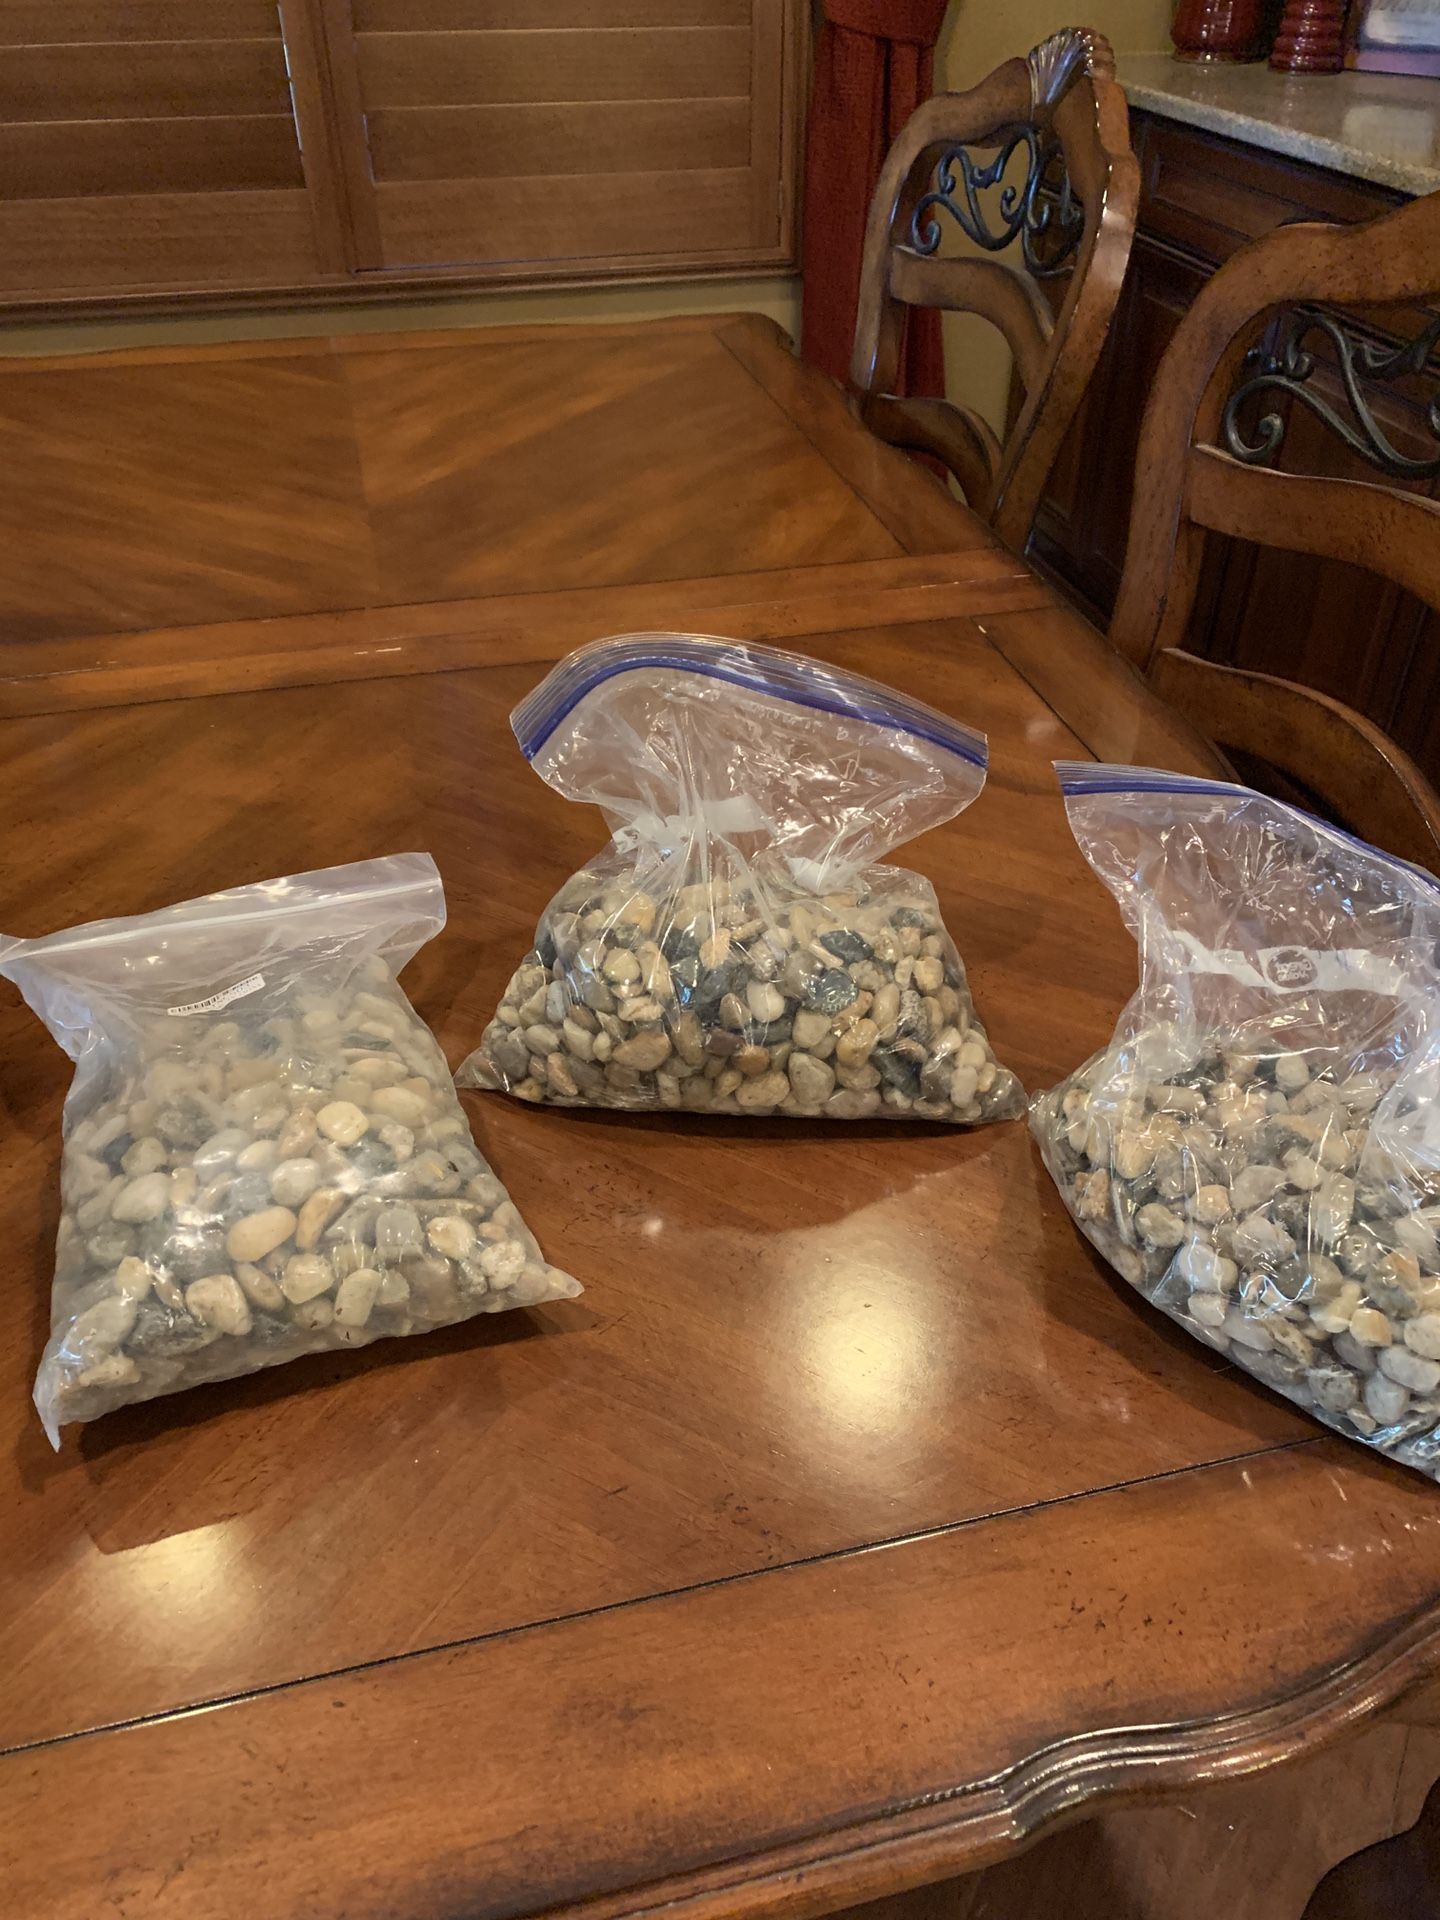 Free bags of small stones